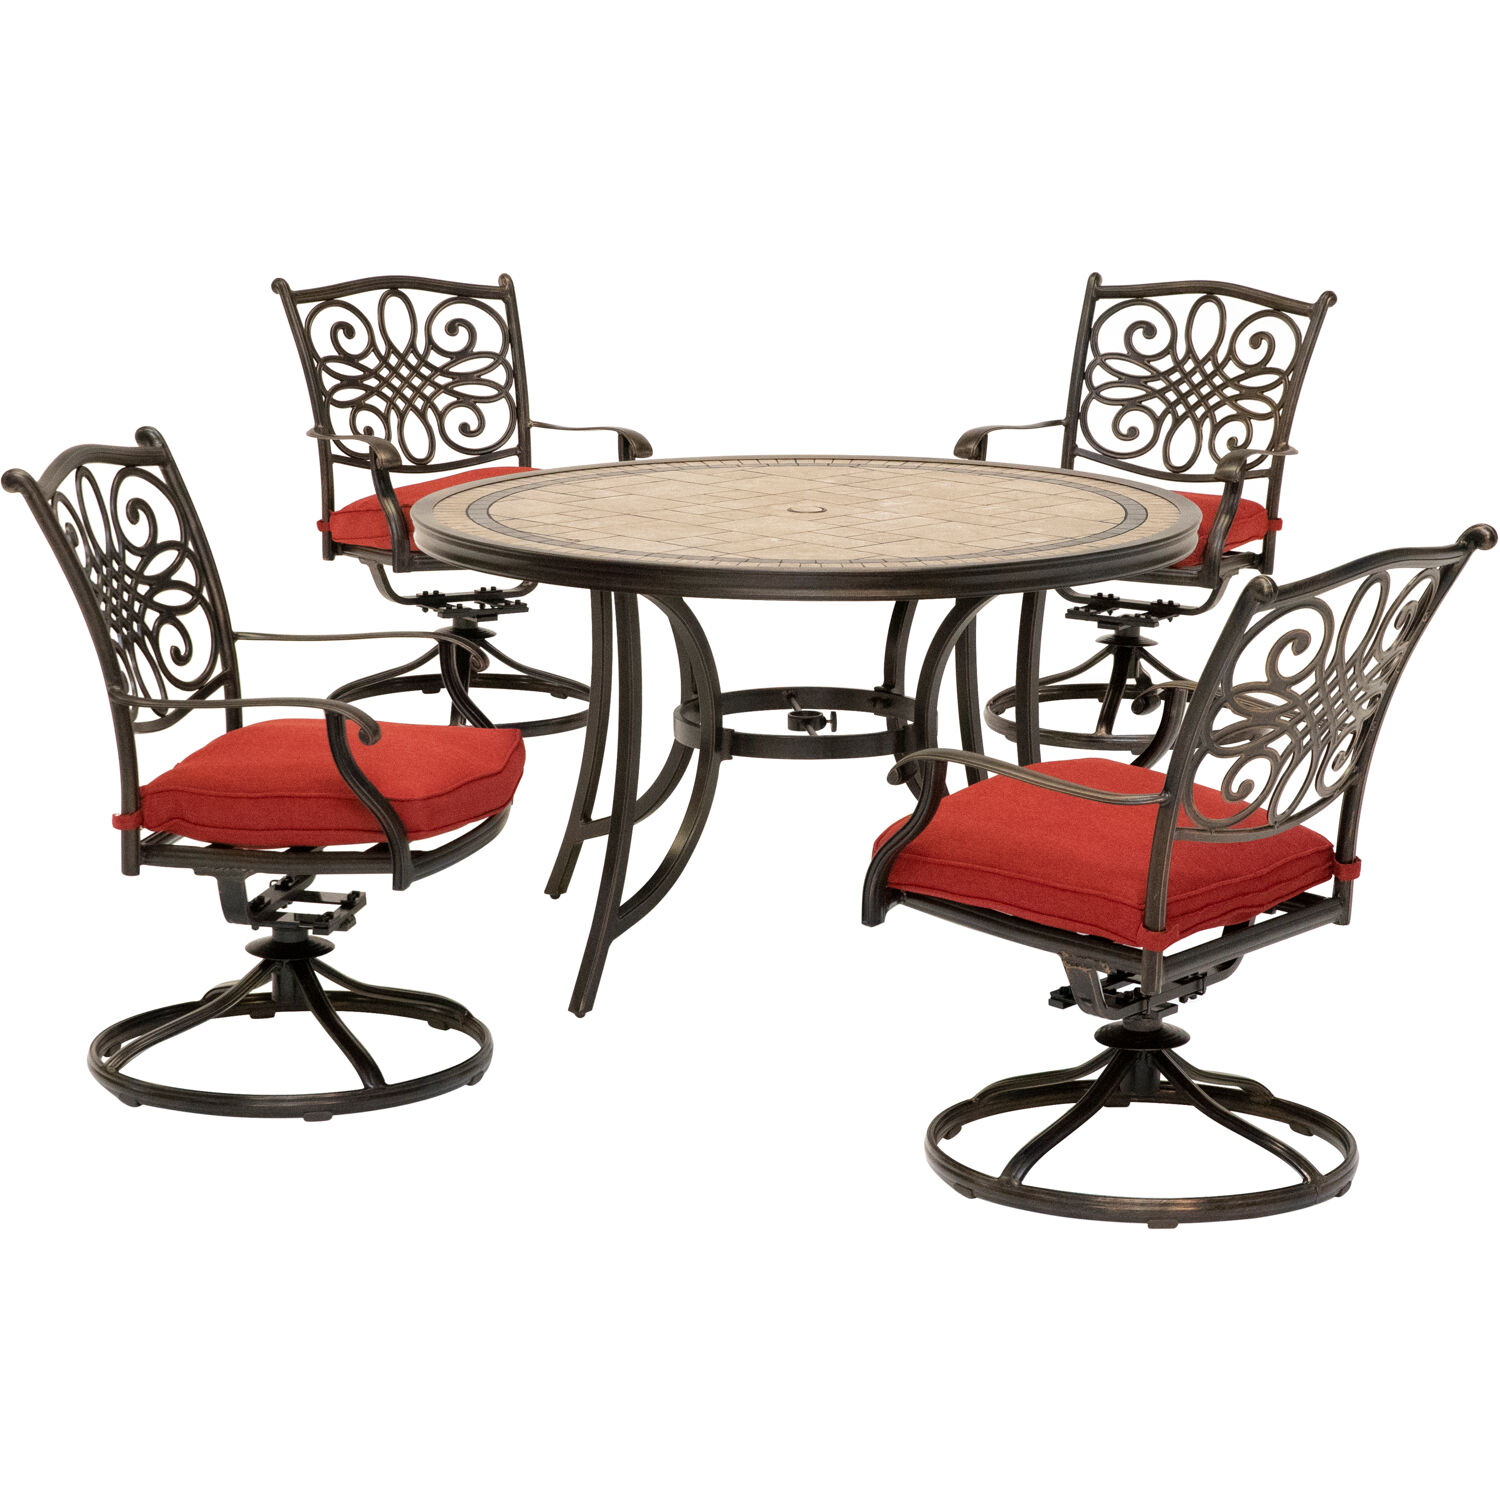 Hanover Monaco 5-Piece Outdoor Furniture Patio Dining Set, 4 Cushioned Swivel Rocker Chairs and 51" Round Tile-Top Table, Brushed Bronze Finish - image 1 of 11